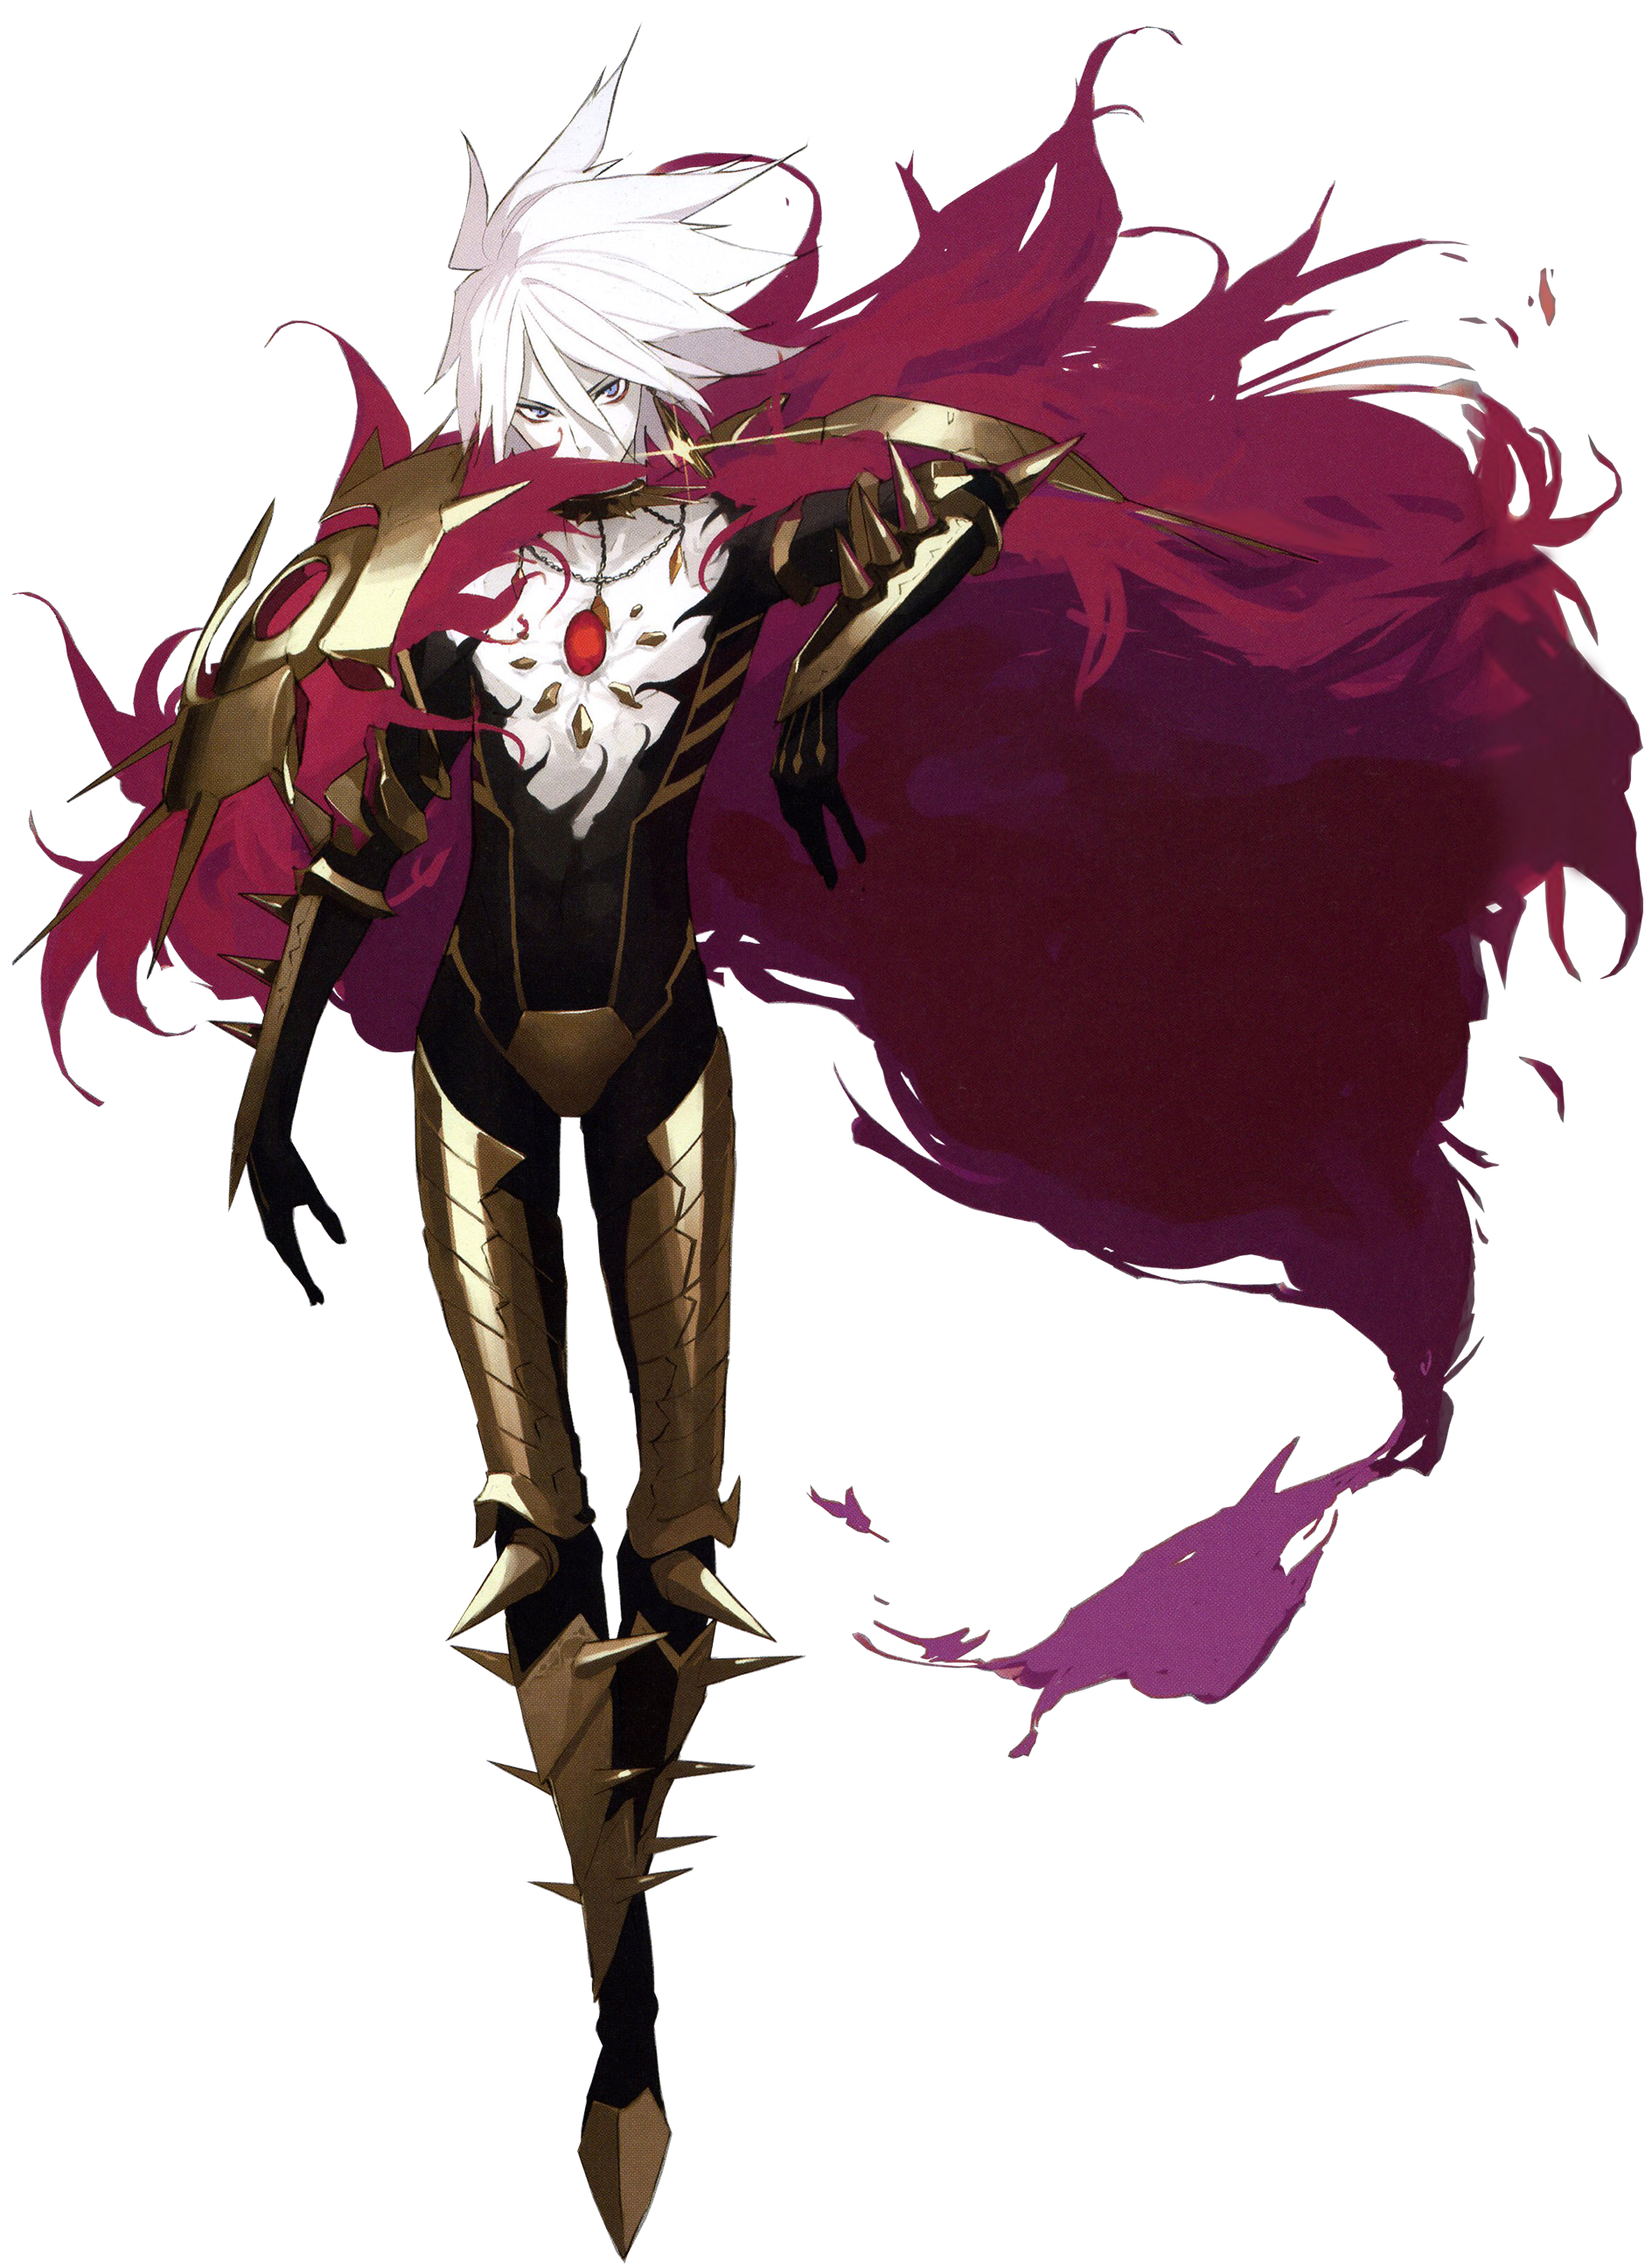 http://static1.wikia.nocookie.net/__cb20130506170847/typemoon/images/2/24/Karna_i.png